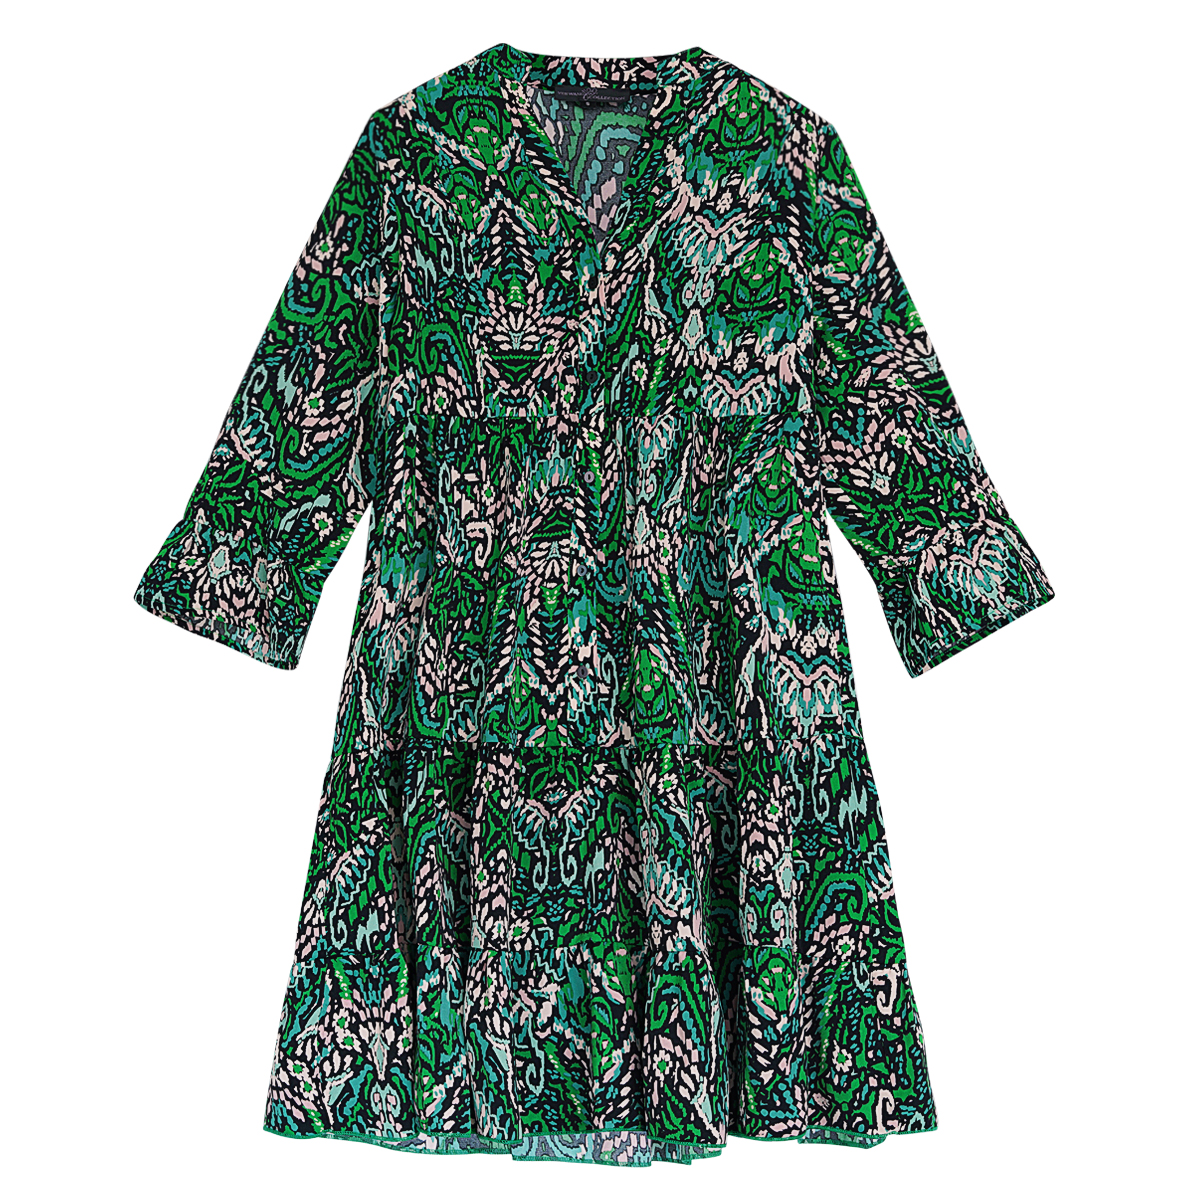 Autumn dress with abstract print